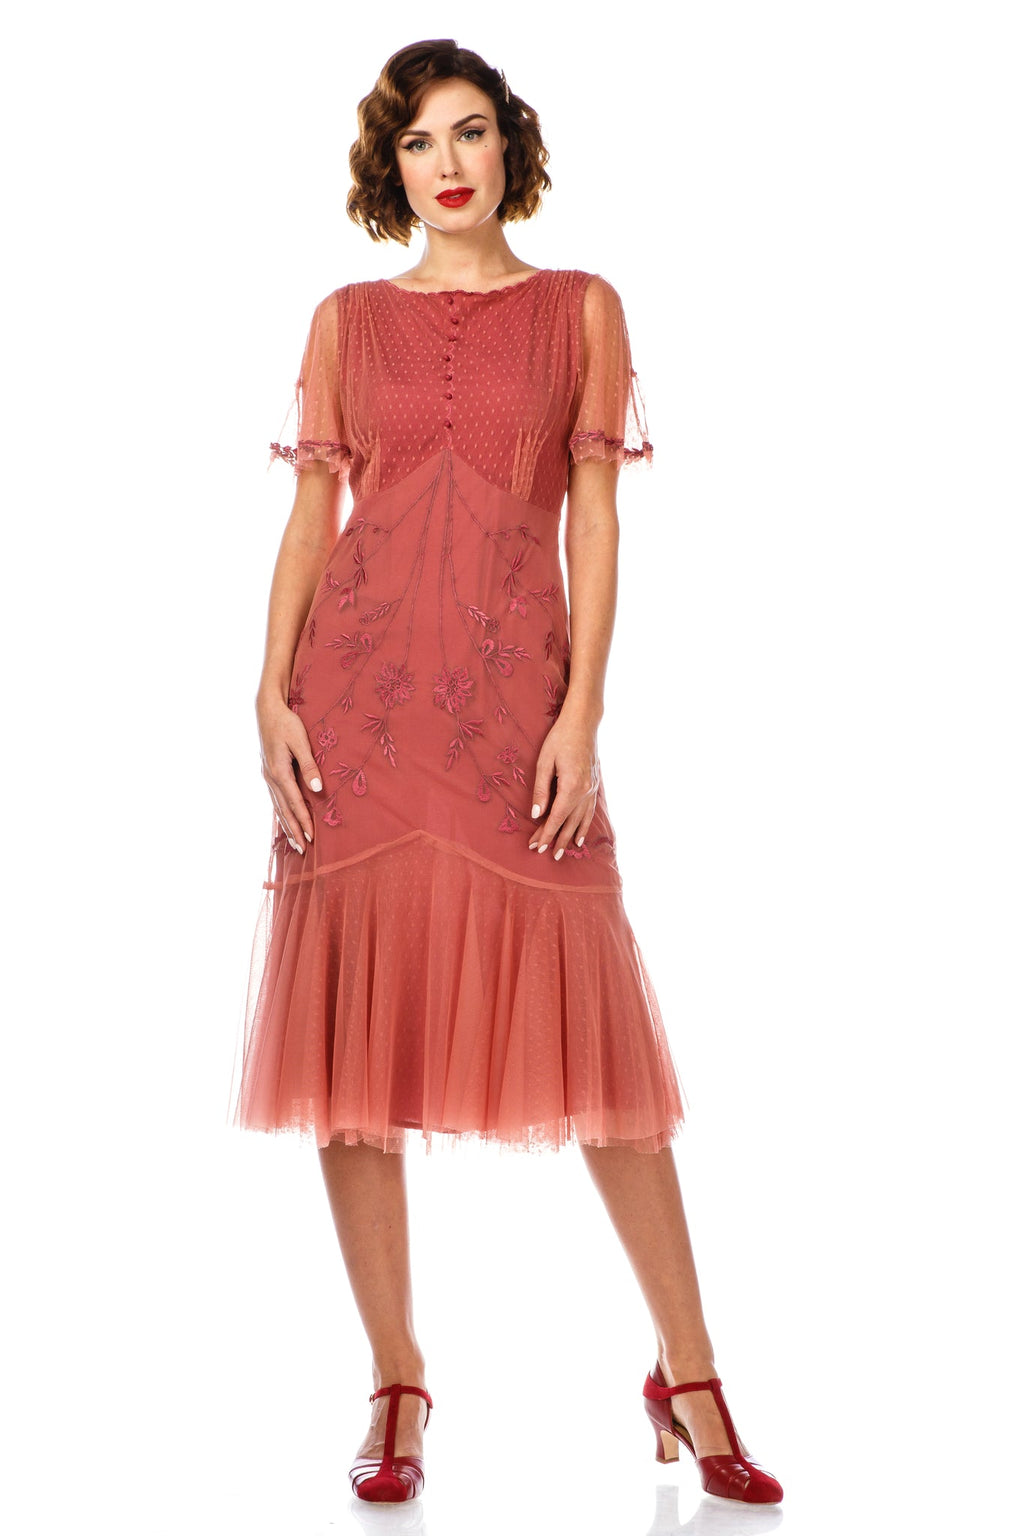 Step-into-the-Past-with-Nataya's-Rose-Hued-Retro-Chic-Cocktail-Ensemble